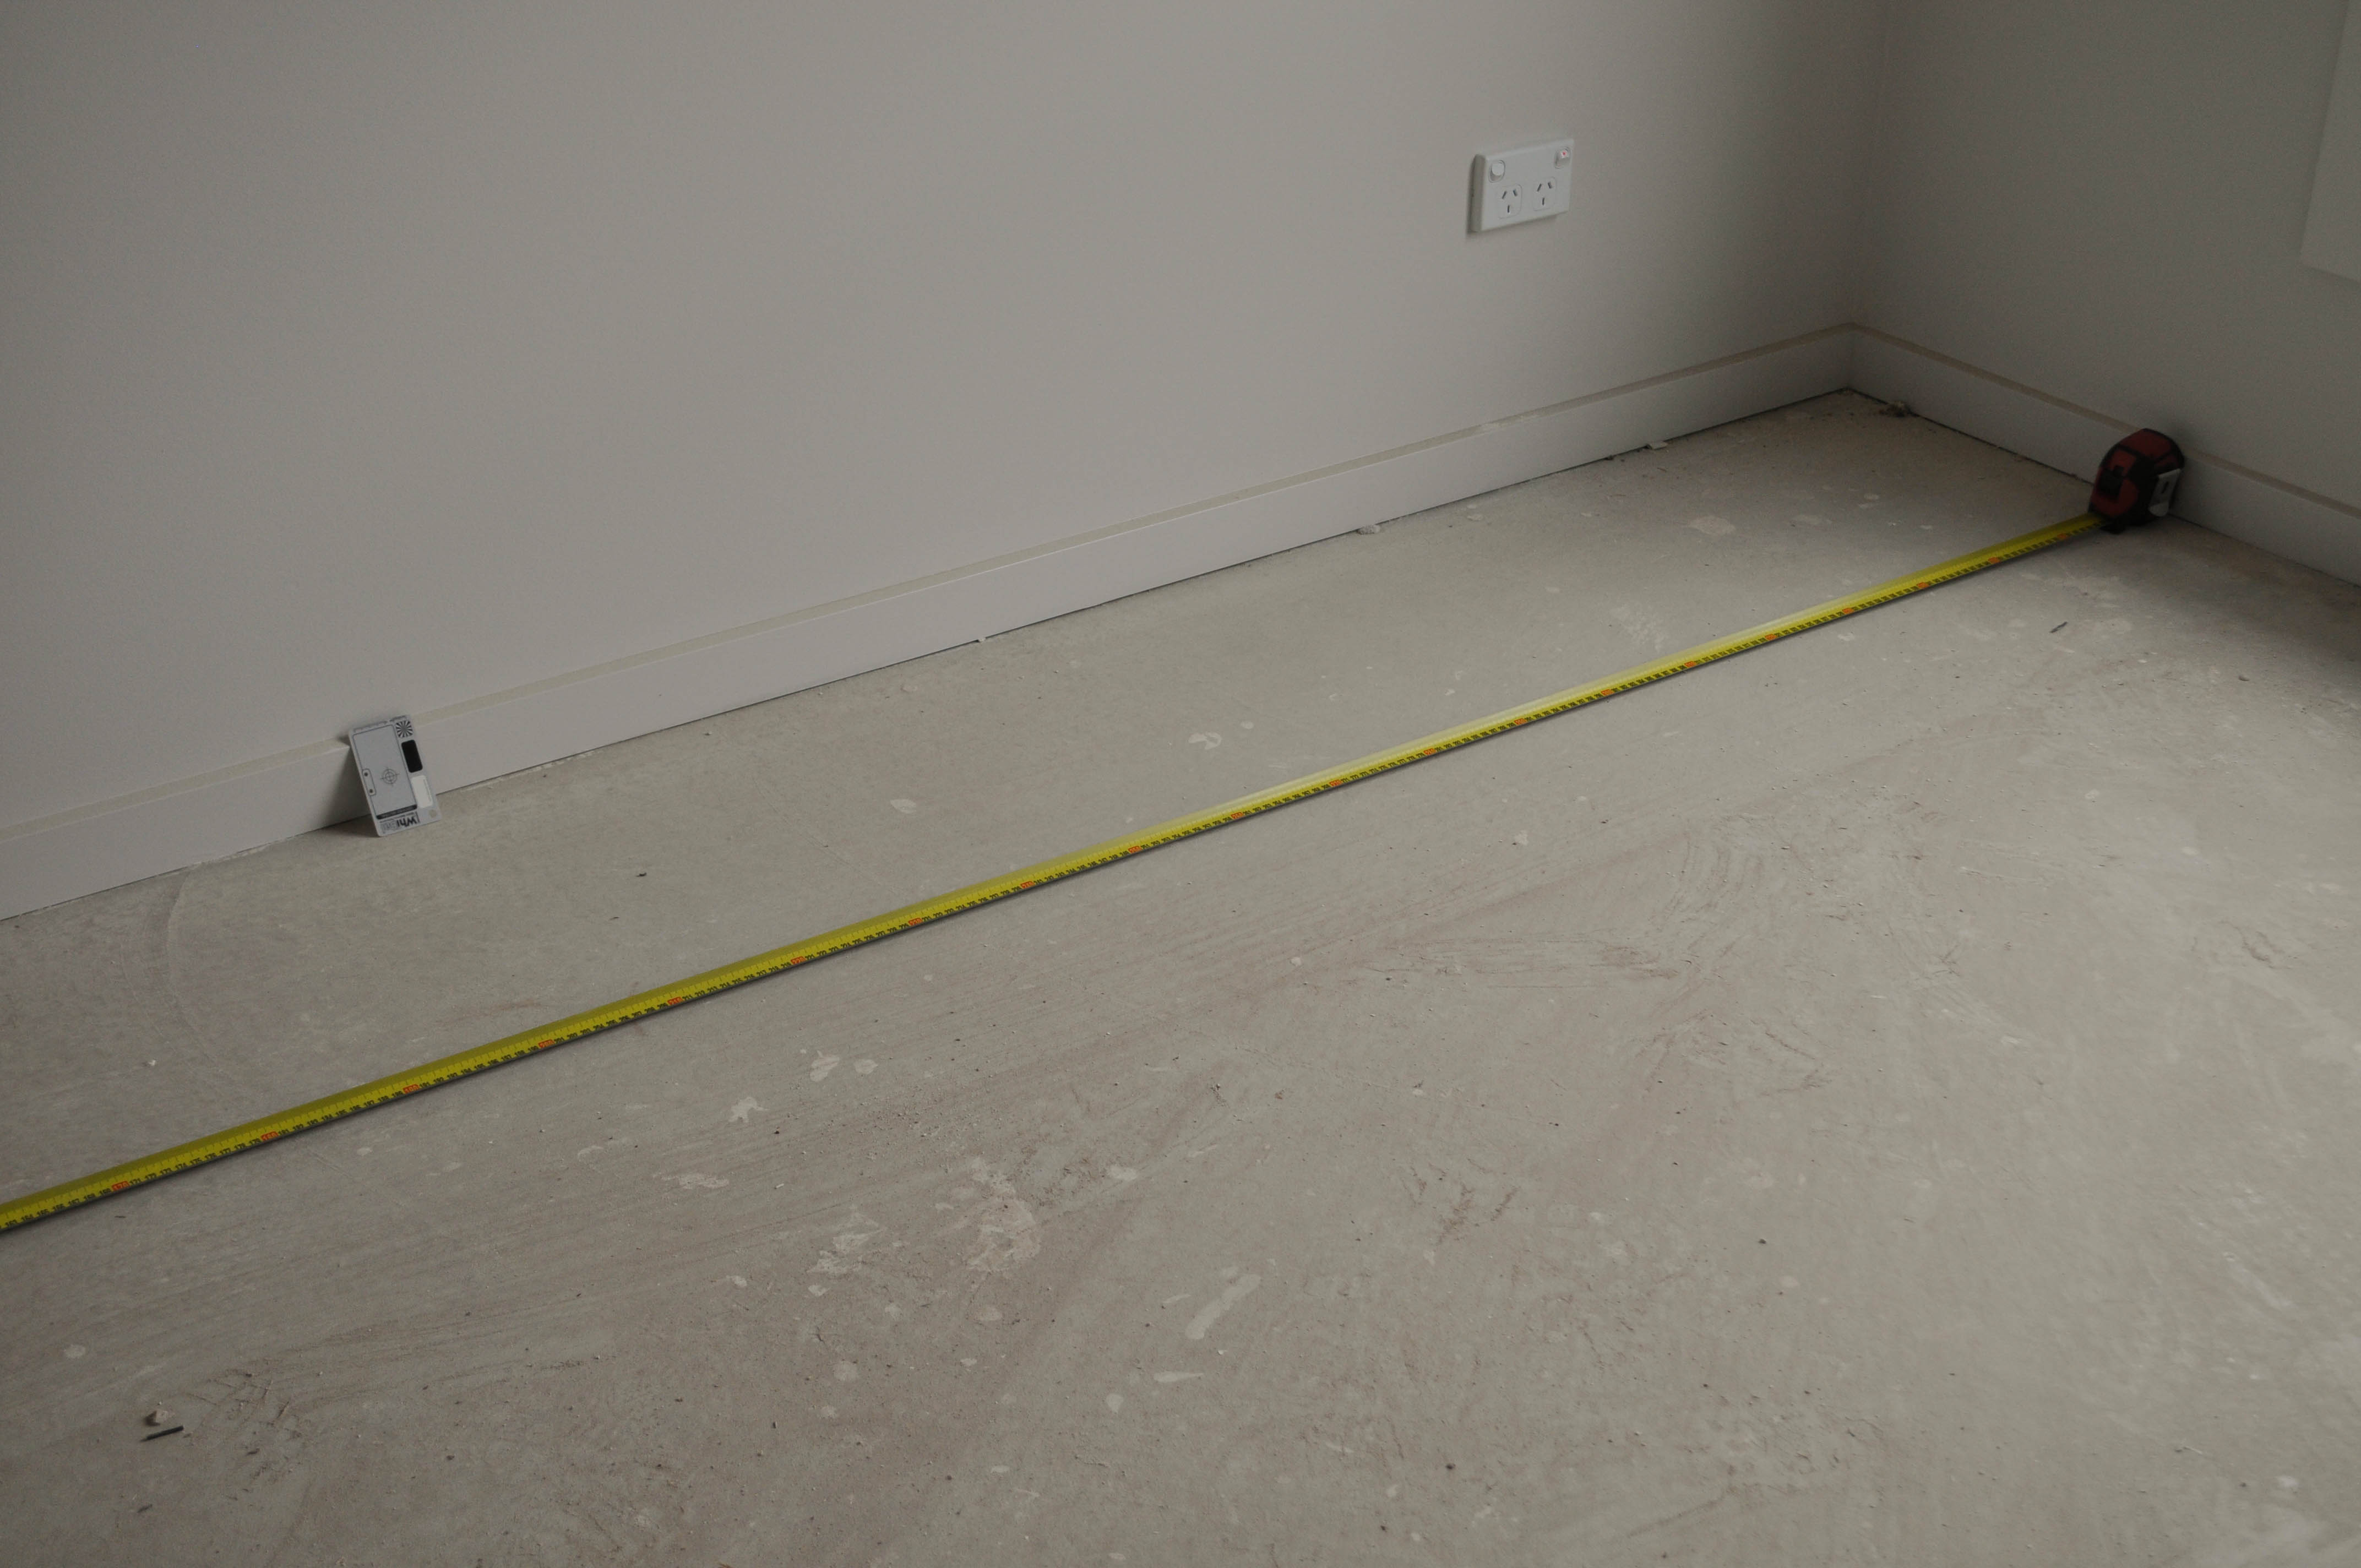 a room in a home, in Werribee, Vic 3030, being measured for the purpose of working out how much carpet is needed to cover it in a 
 carpet installation project conducted by Concord Floors. The floor of the room is bare concrete and has a measuring tape stretched over and across it. This is the initial stage of 
 the carpet installation  process.